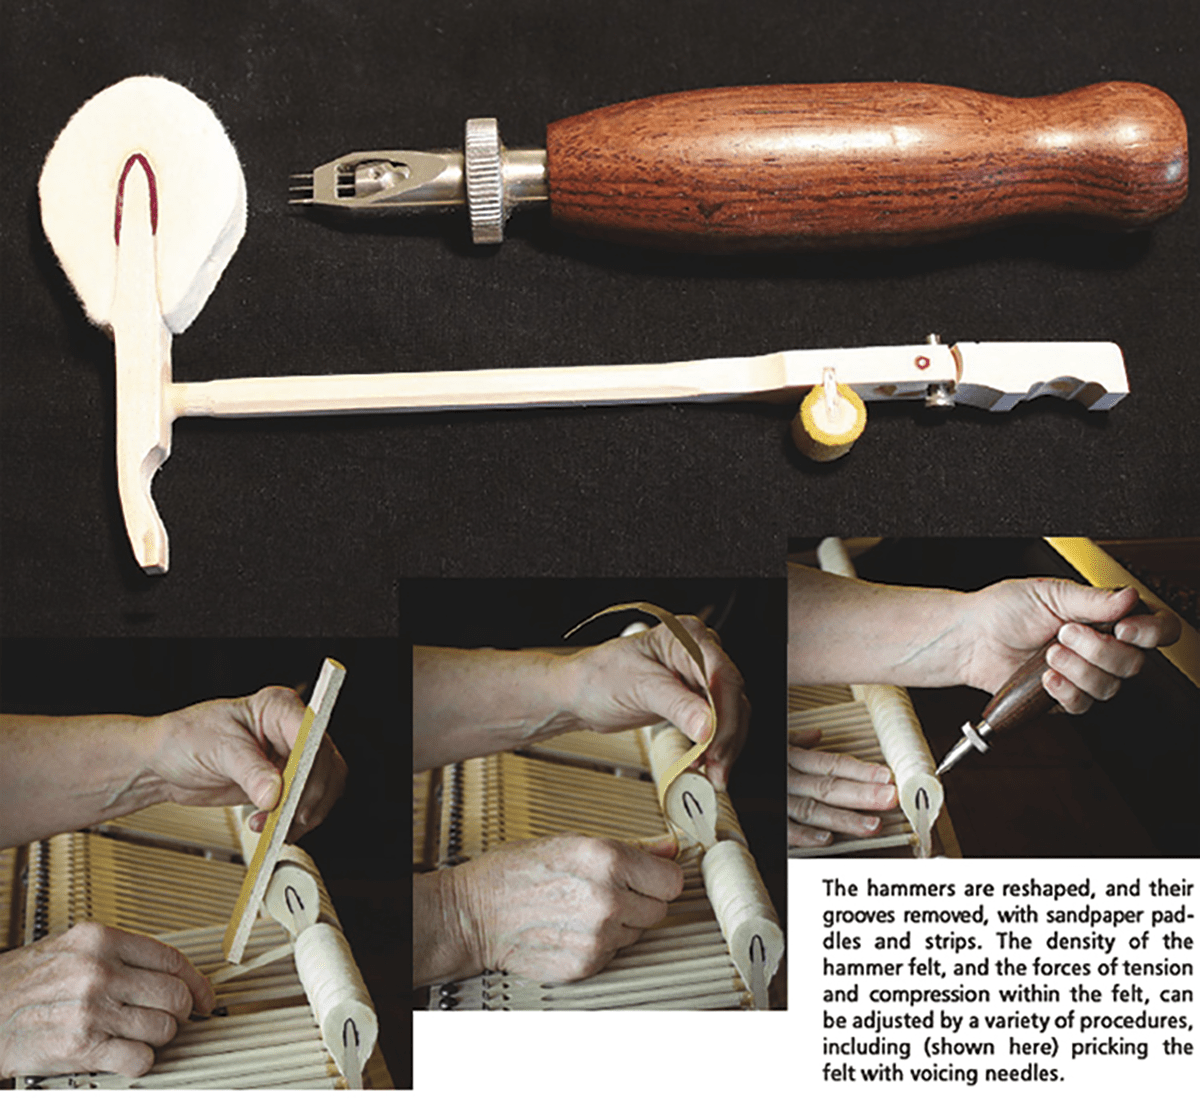 The hammers are reshaped, and their grooves removed, with sandpaper paddles and strips. The density of the hammer felt, and the forces of tension and compression within the felt, can be adjusted by a variety of procedures, including (shown here) pricking the felt with voicing needles.